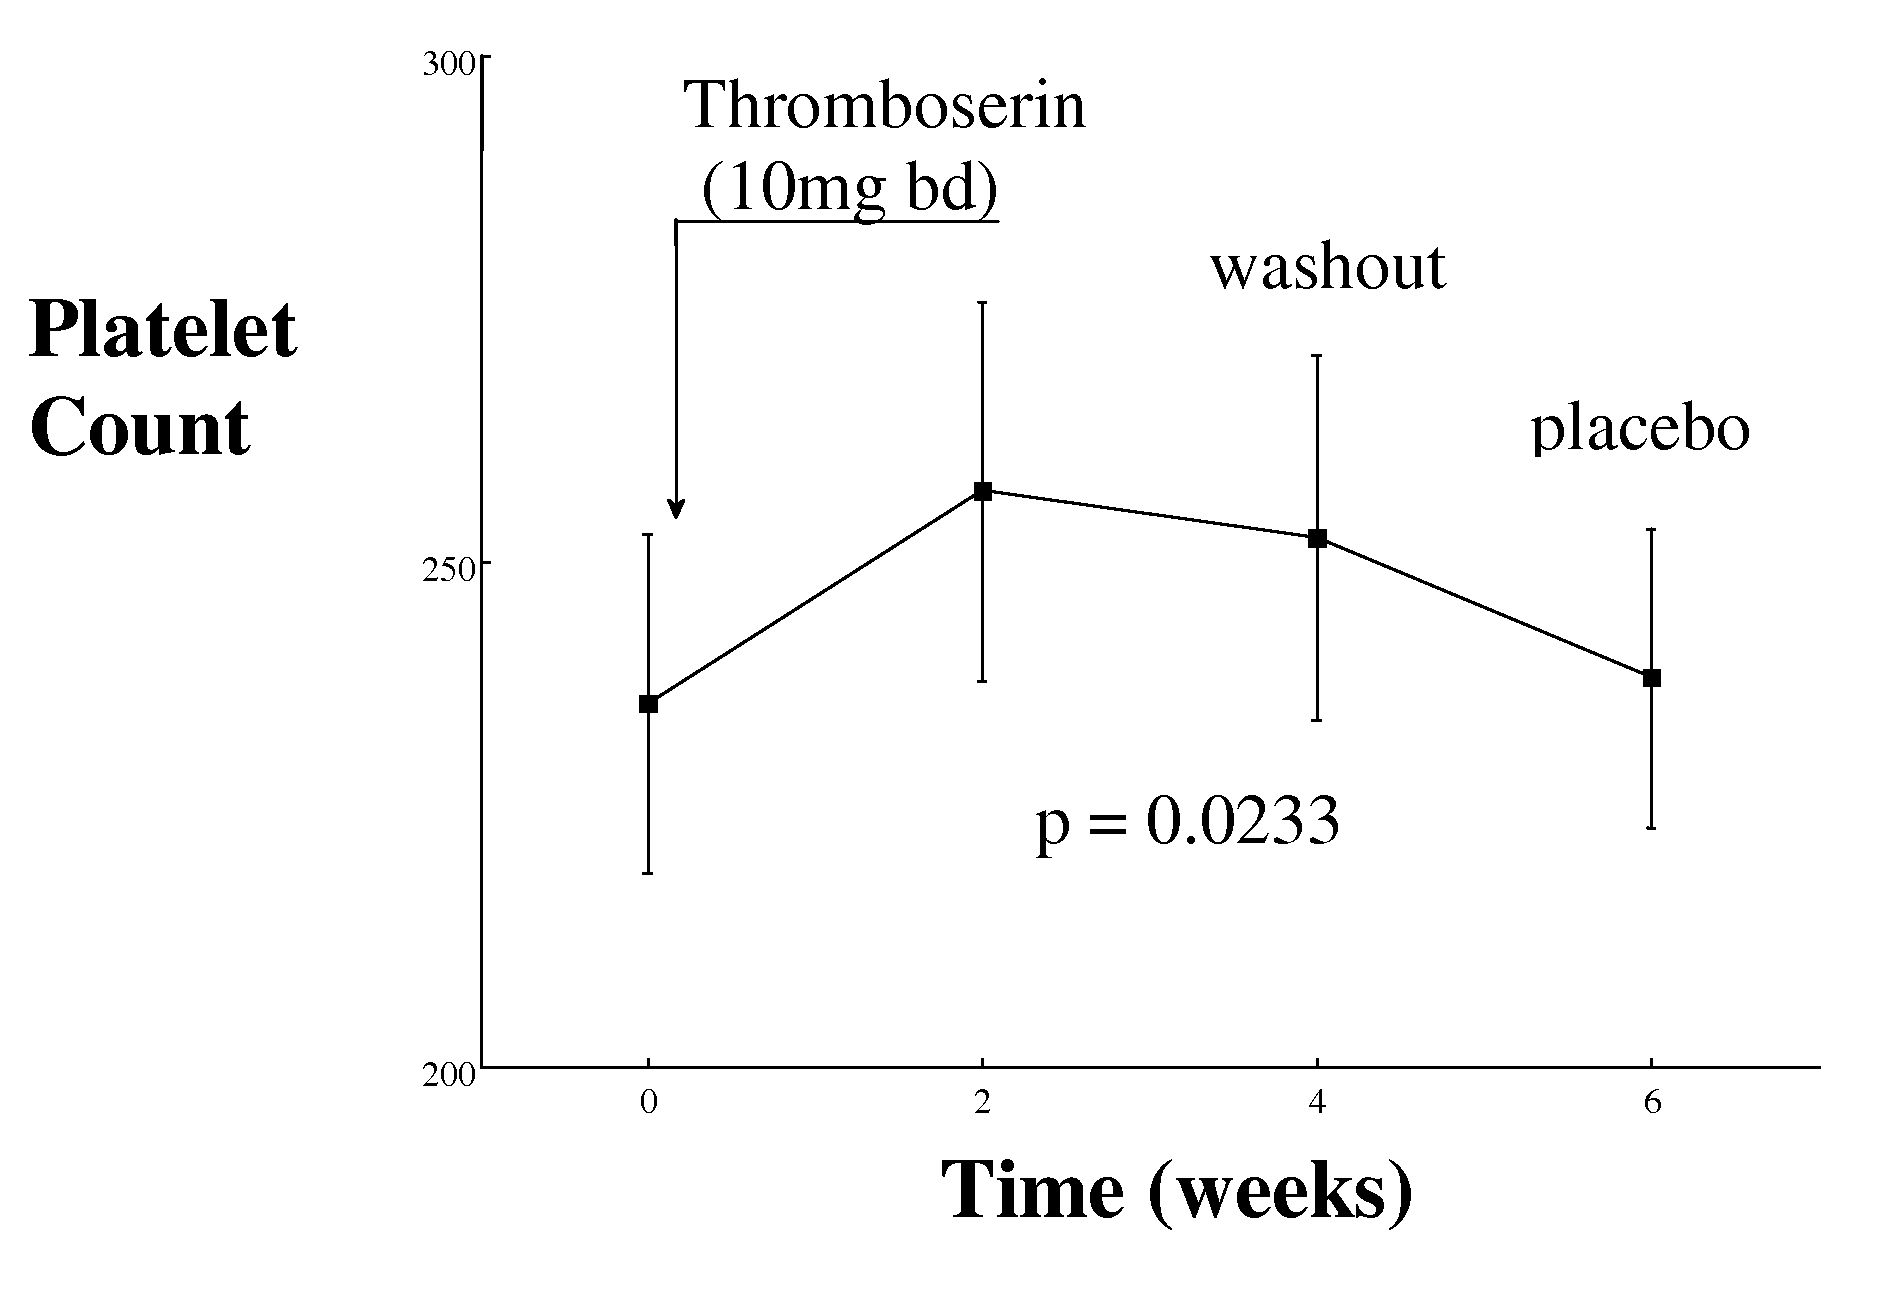 Method of treating or preventing thrombosis in a patient with 5-HT2A receptor antagonist thromboserin